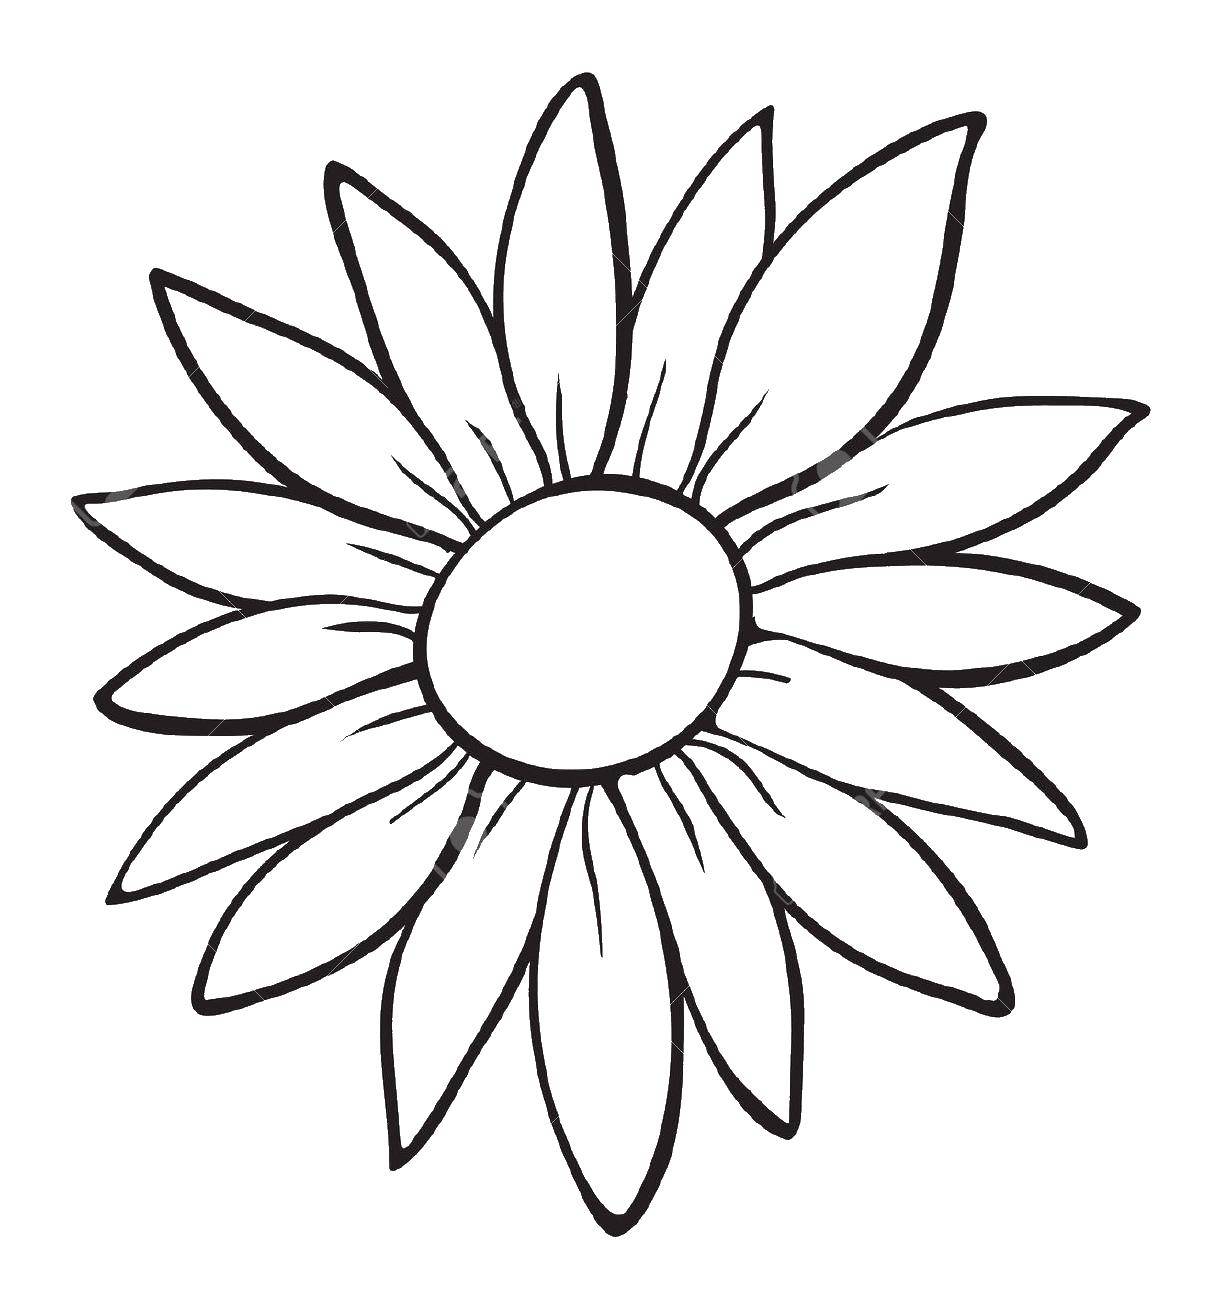 Coloring Flower. Category flowers. Tags:  flowers, flower, petals.